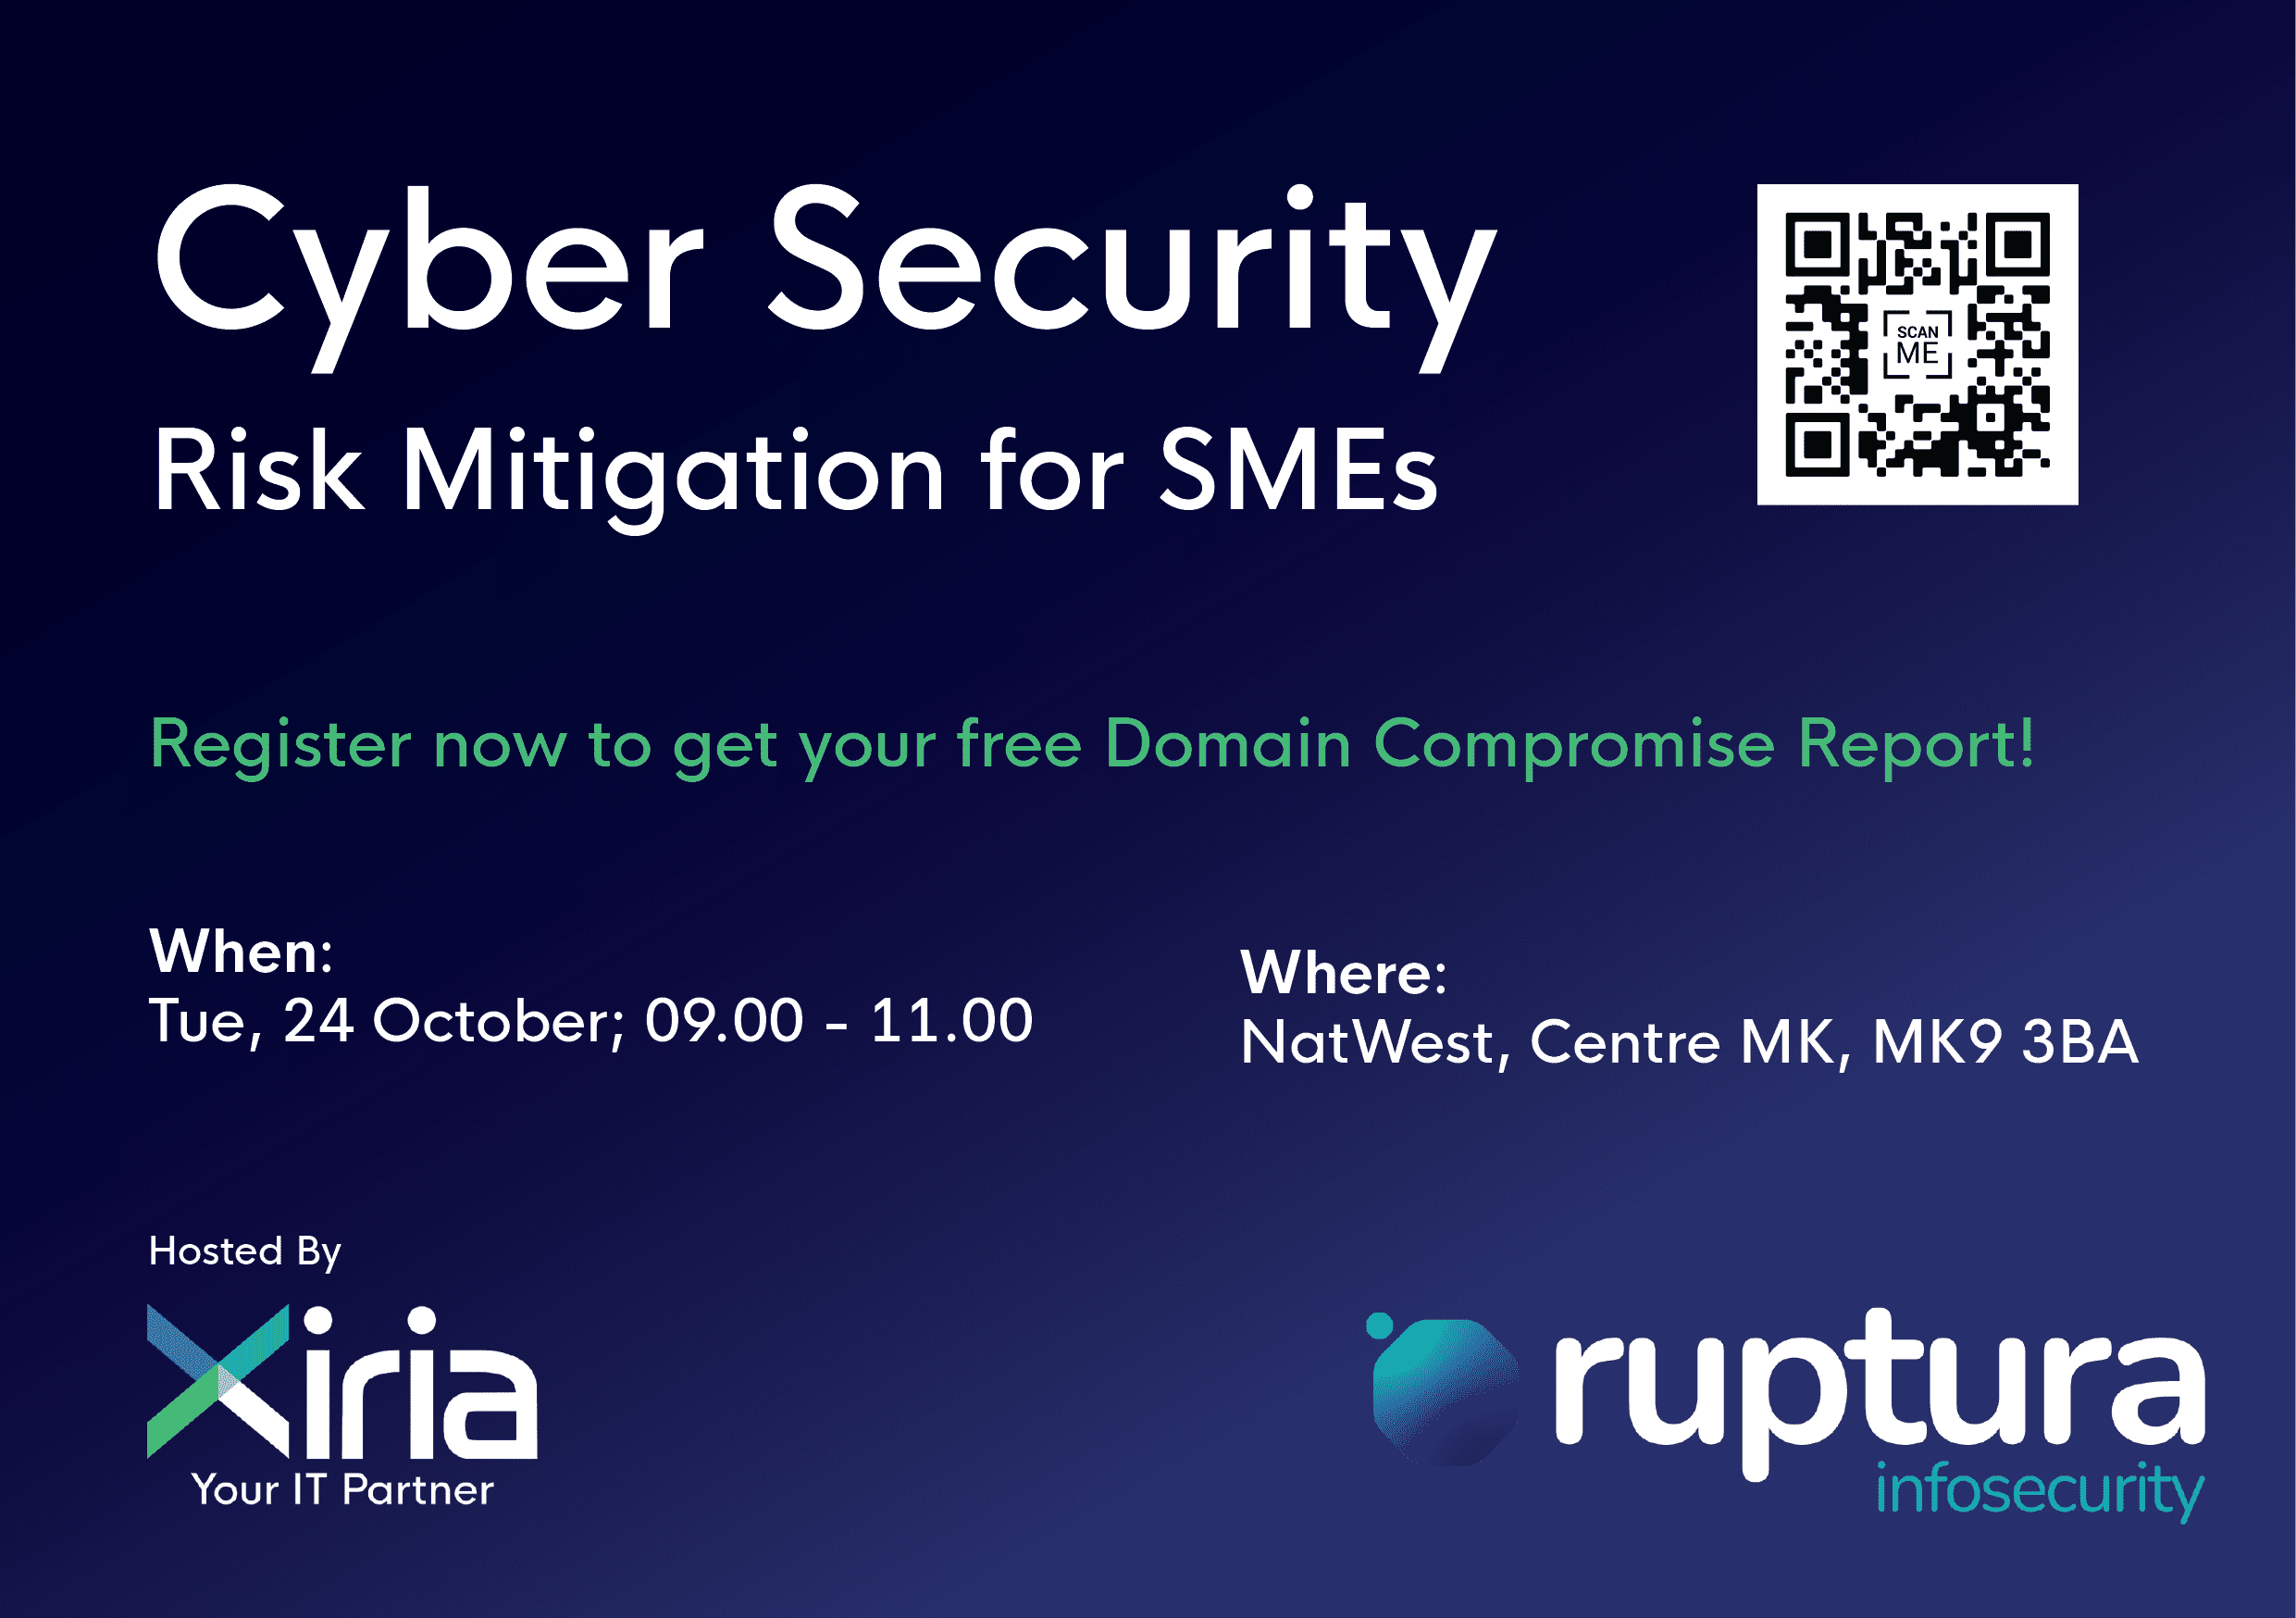 Cyber Security Risk Mitigation for SMEs